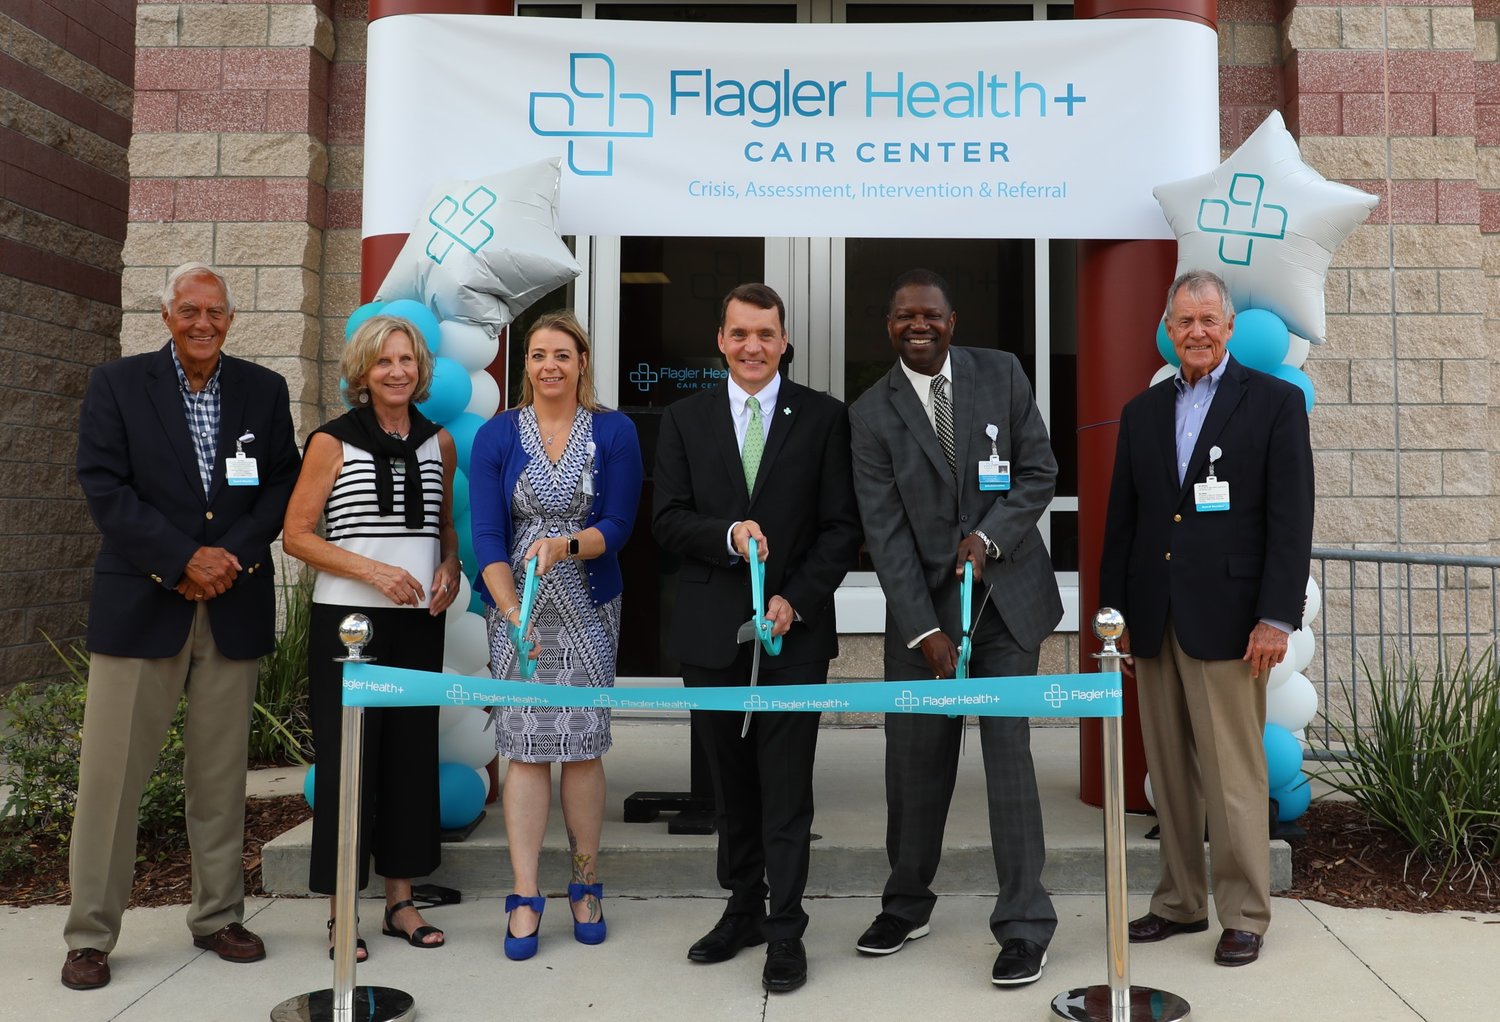 Flagler Health+ representatives cut the ribbon opening the new CAIR Center, which will provide access to, and coordination of, mental and behavioral health services.